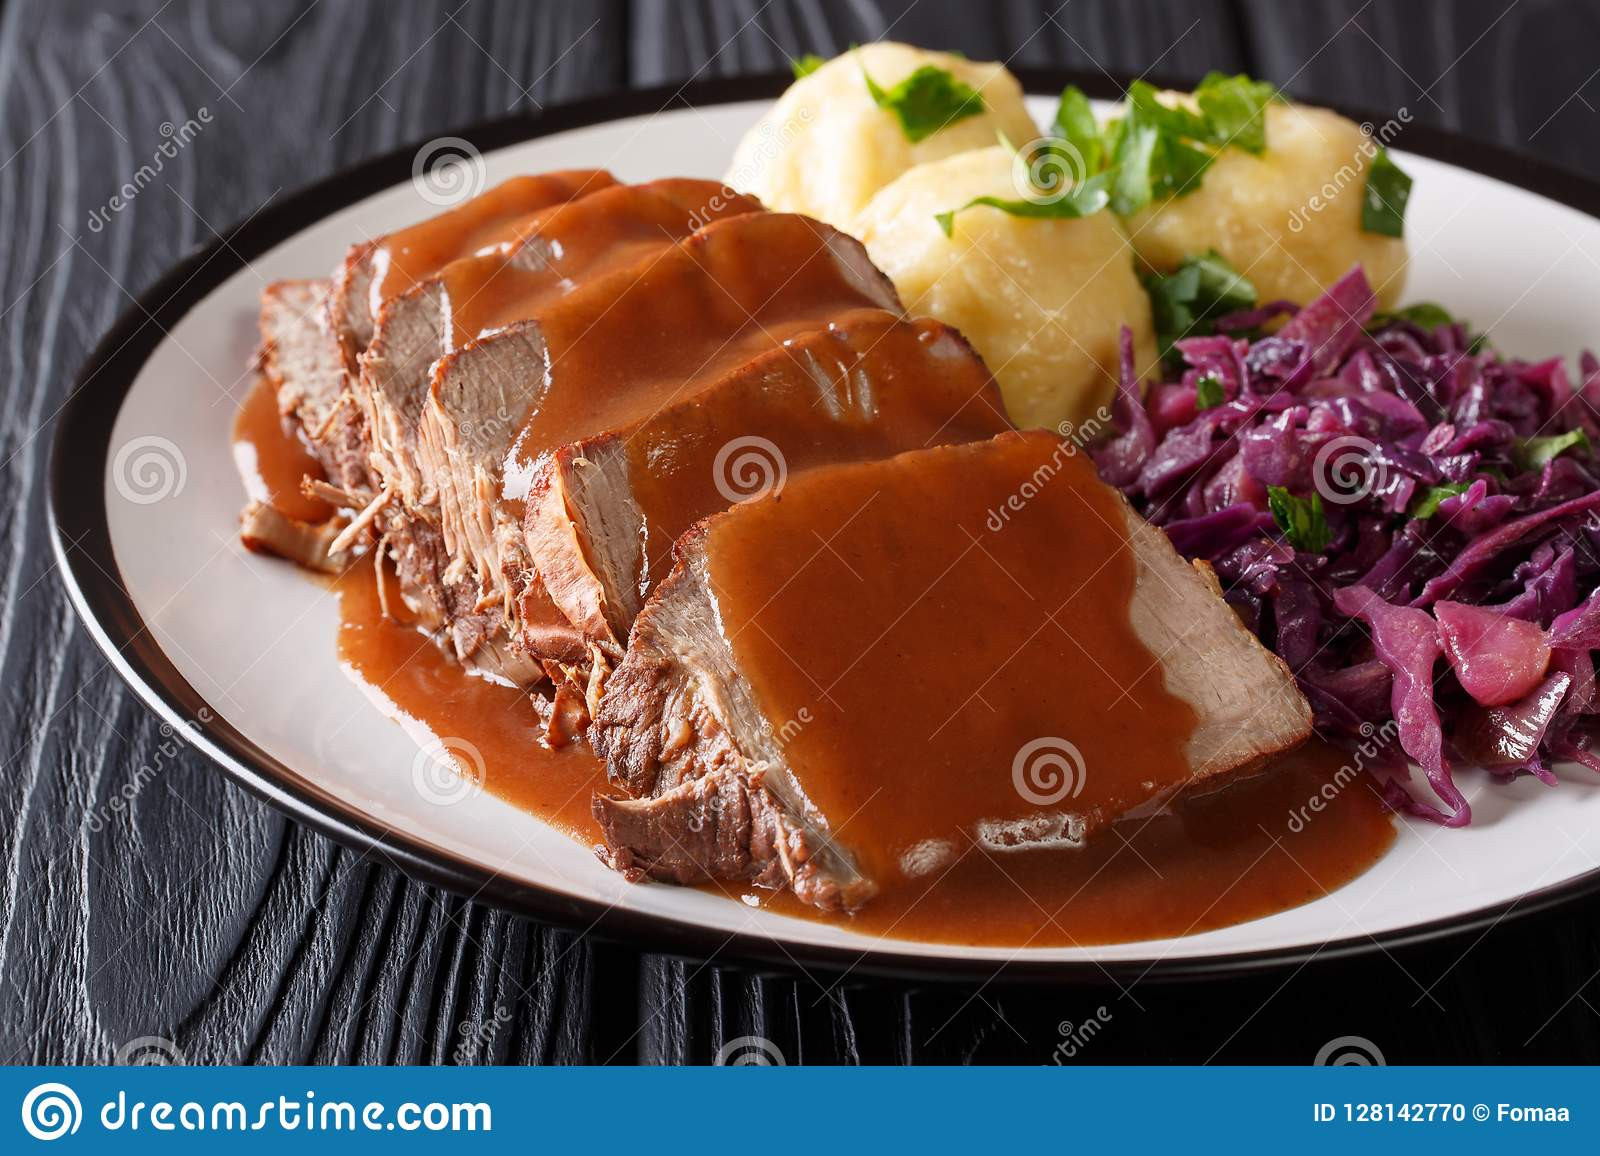 German Beef Stew
 German Sauerbraten Is A Beef Stew With A Spicy Sauce